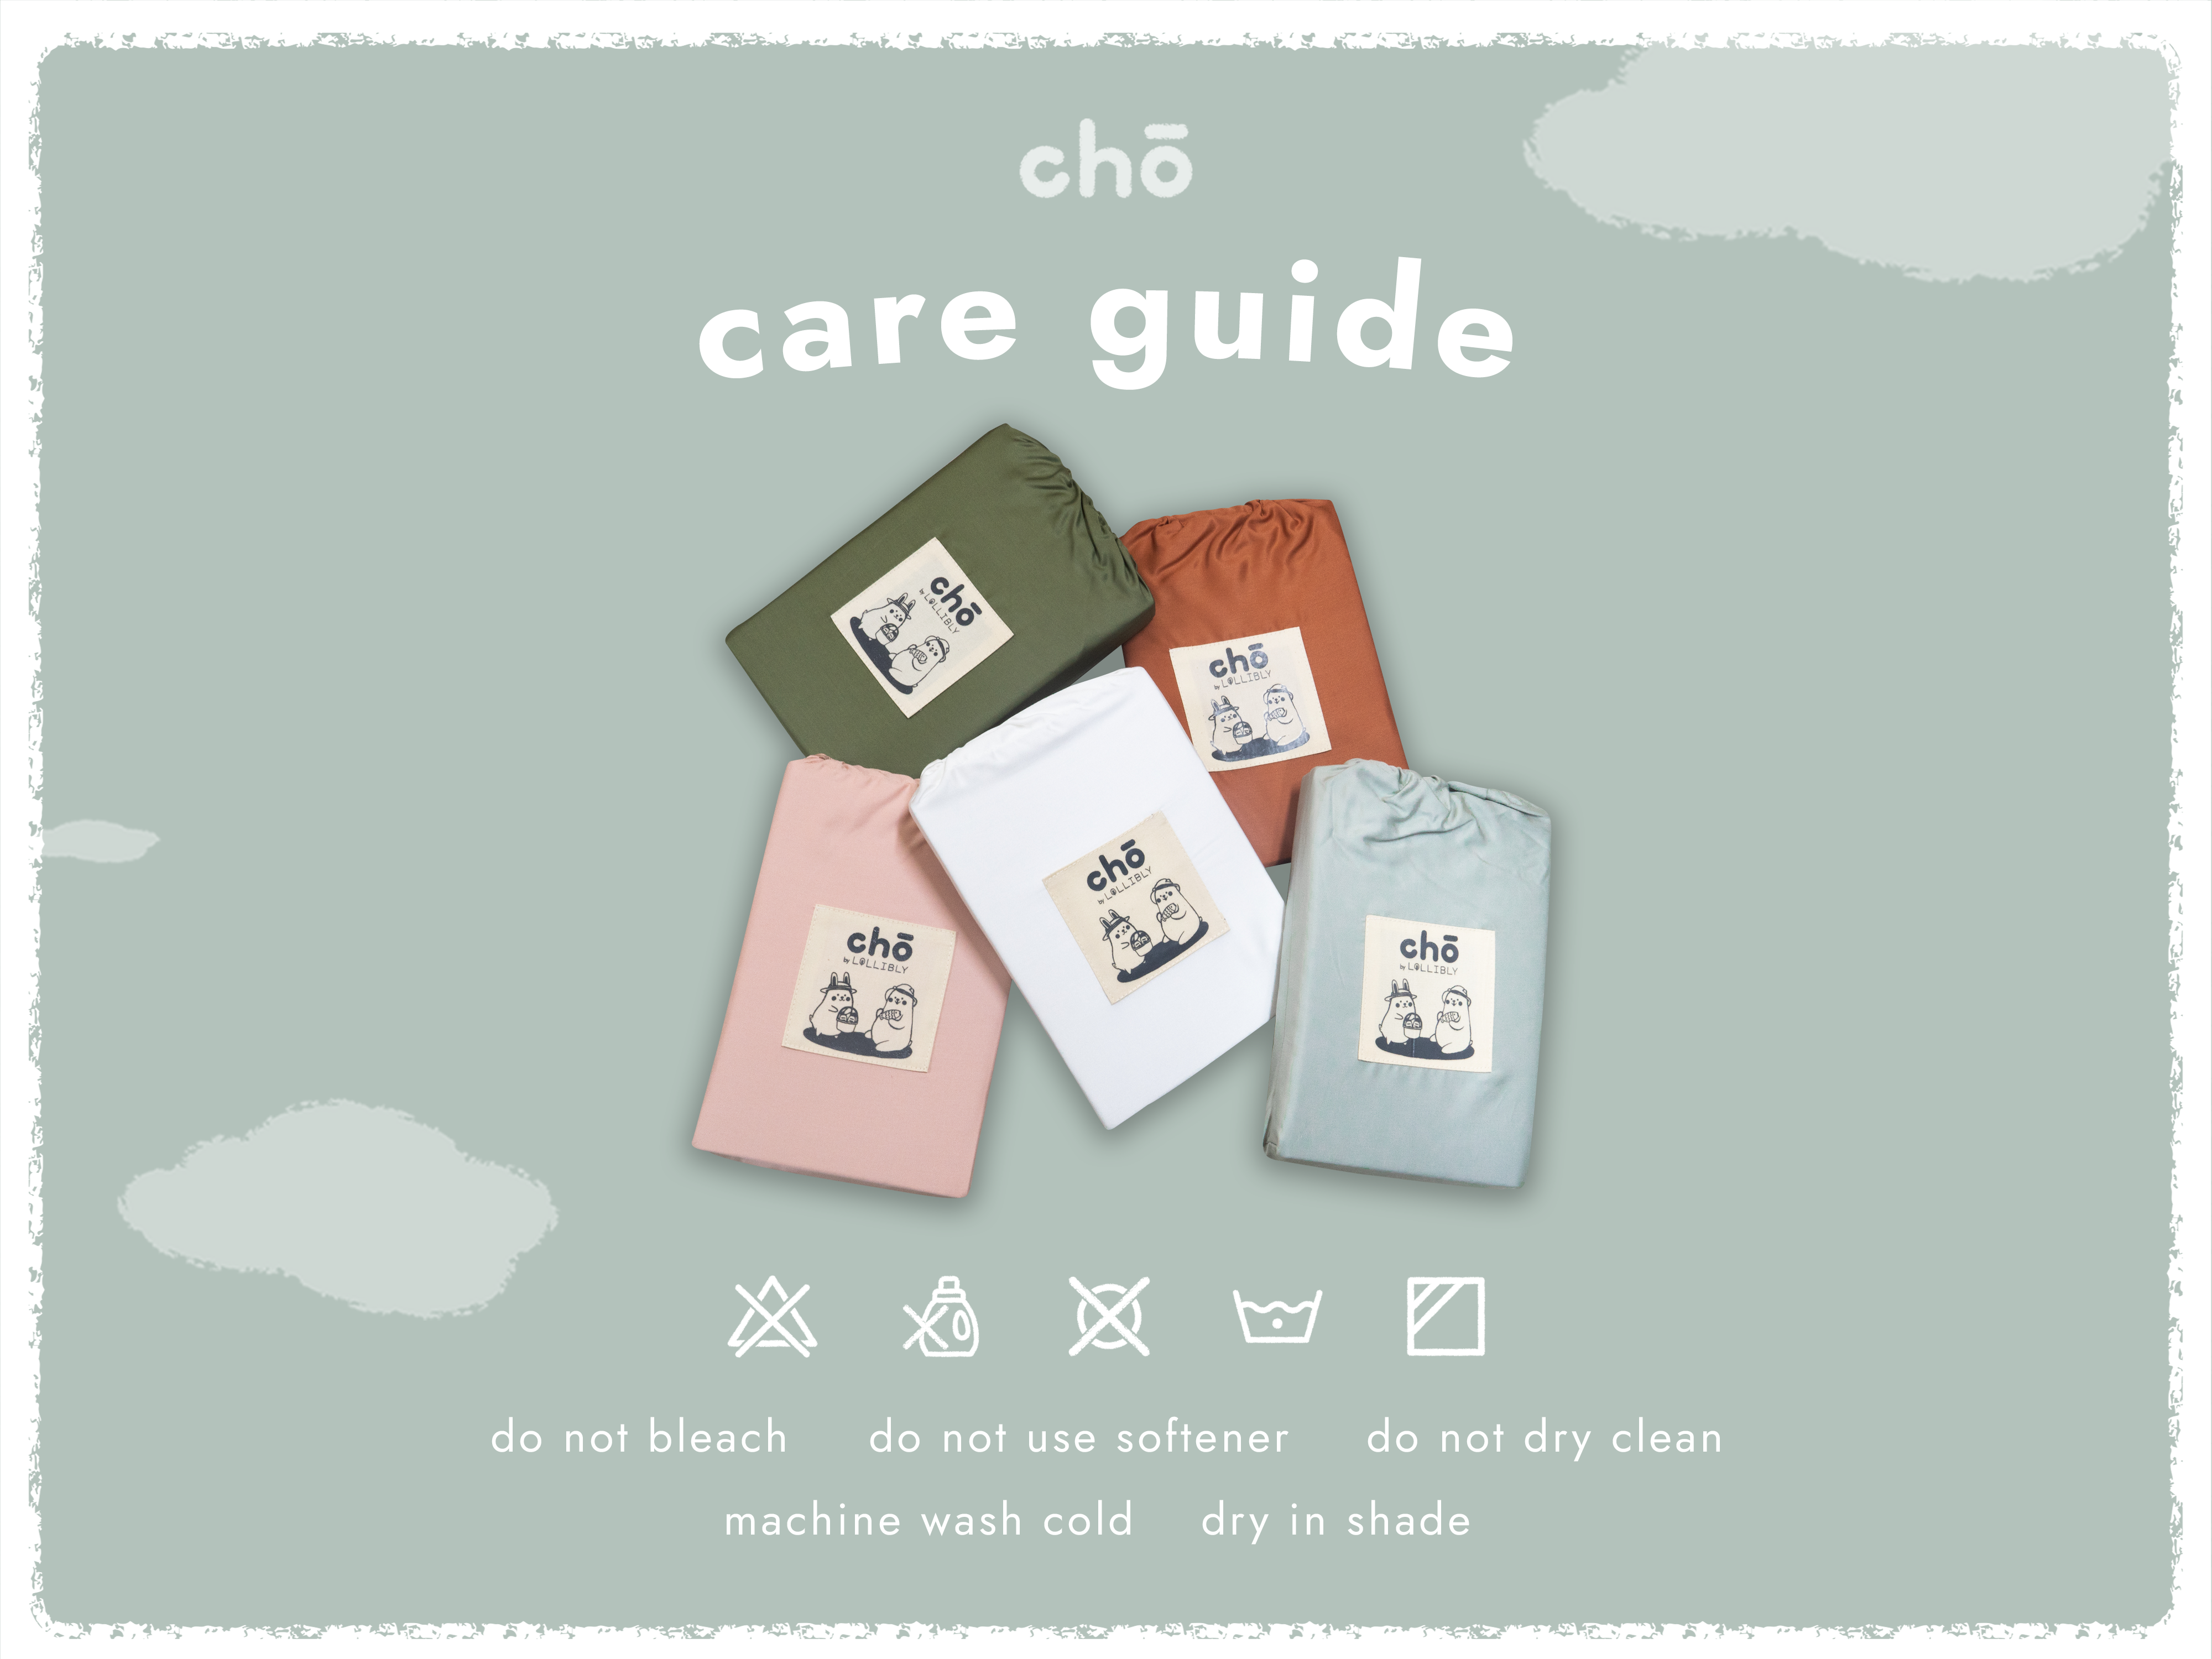 Cho Crib and cot sheet care guide